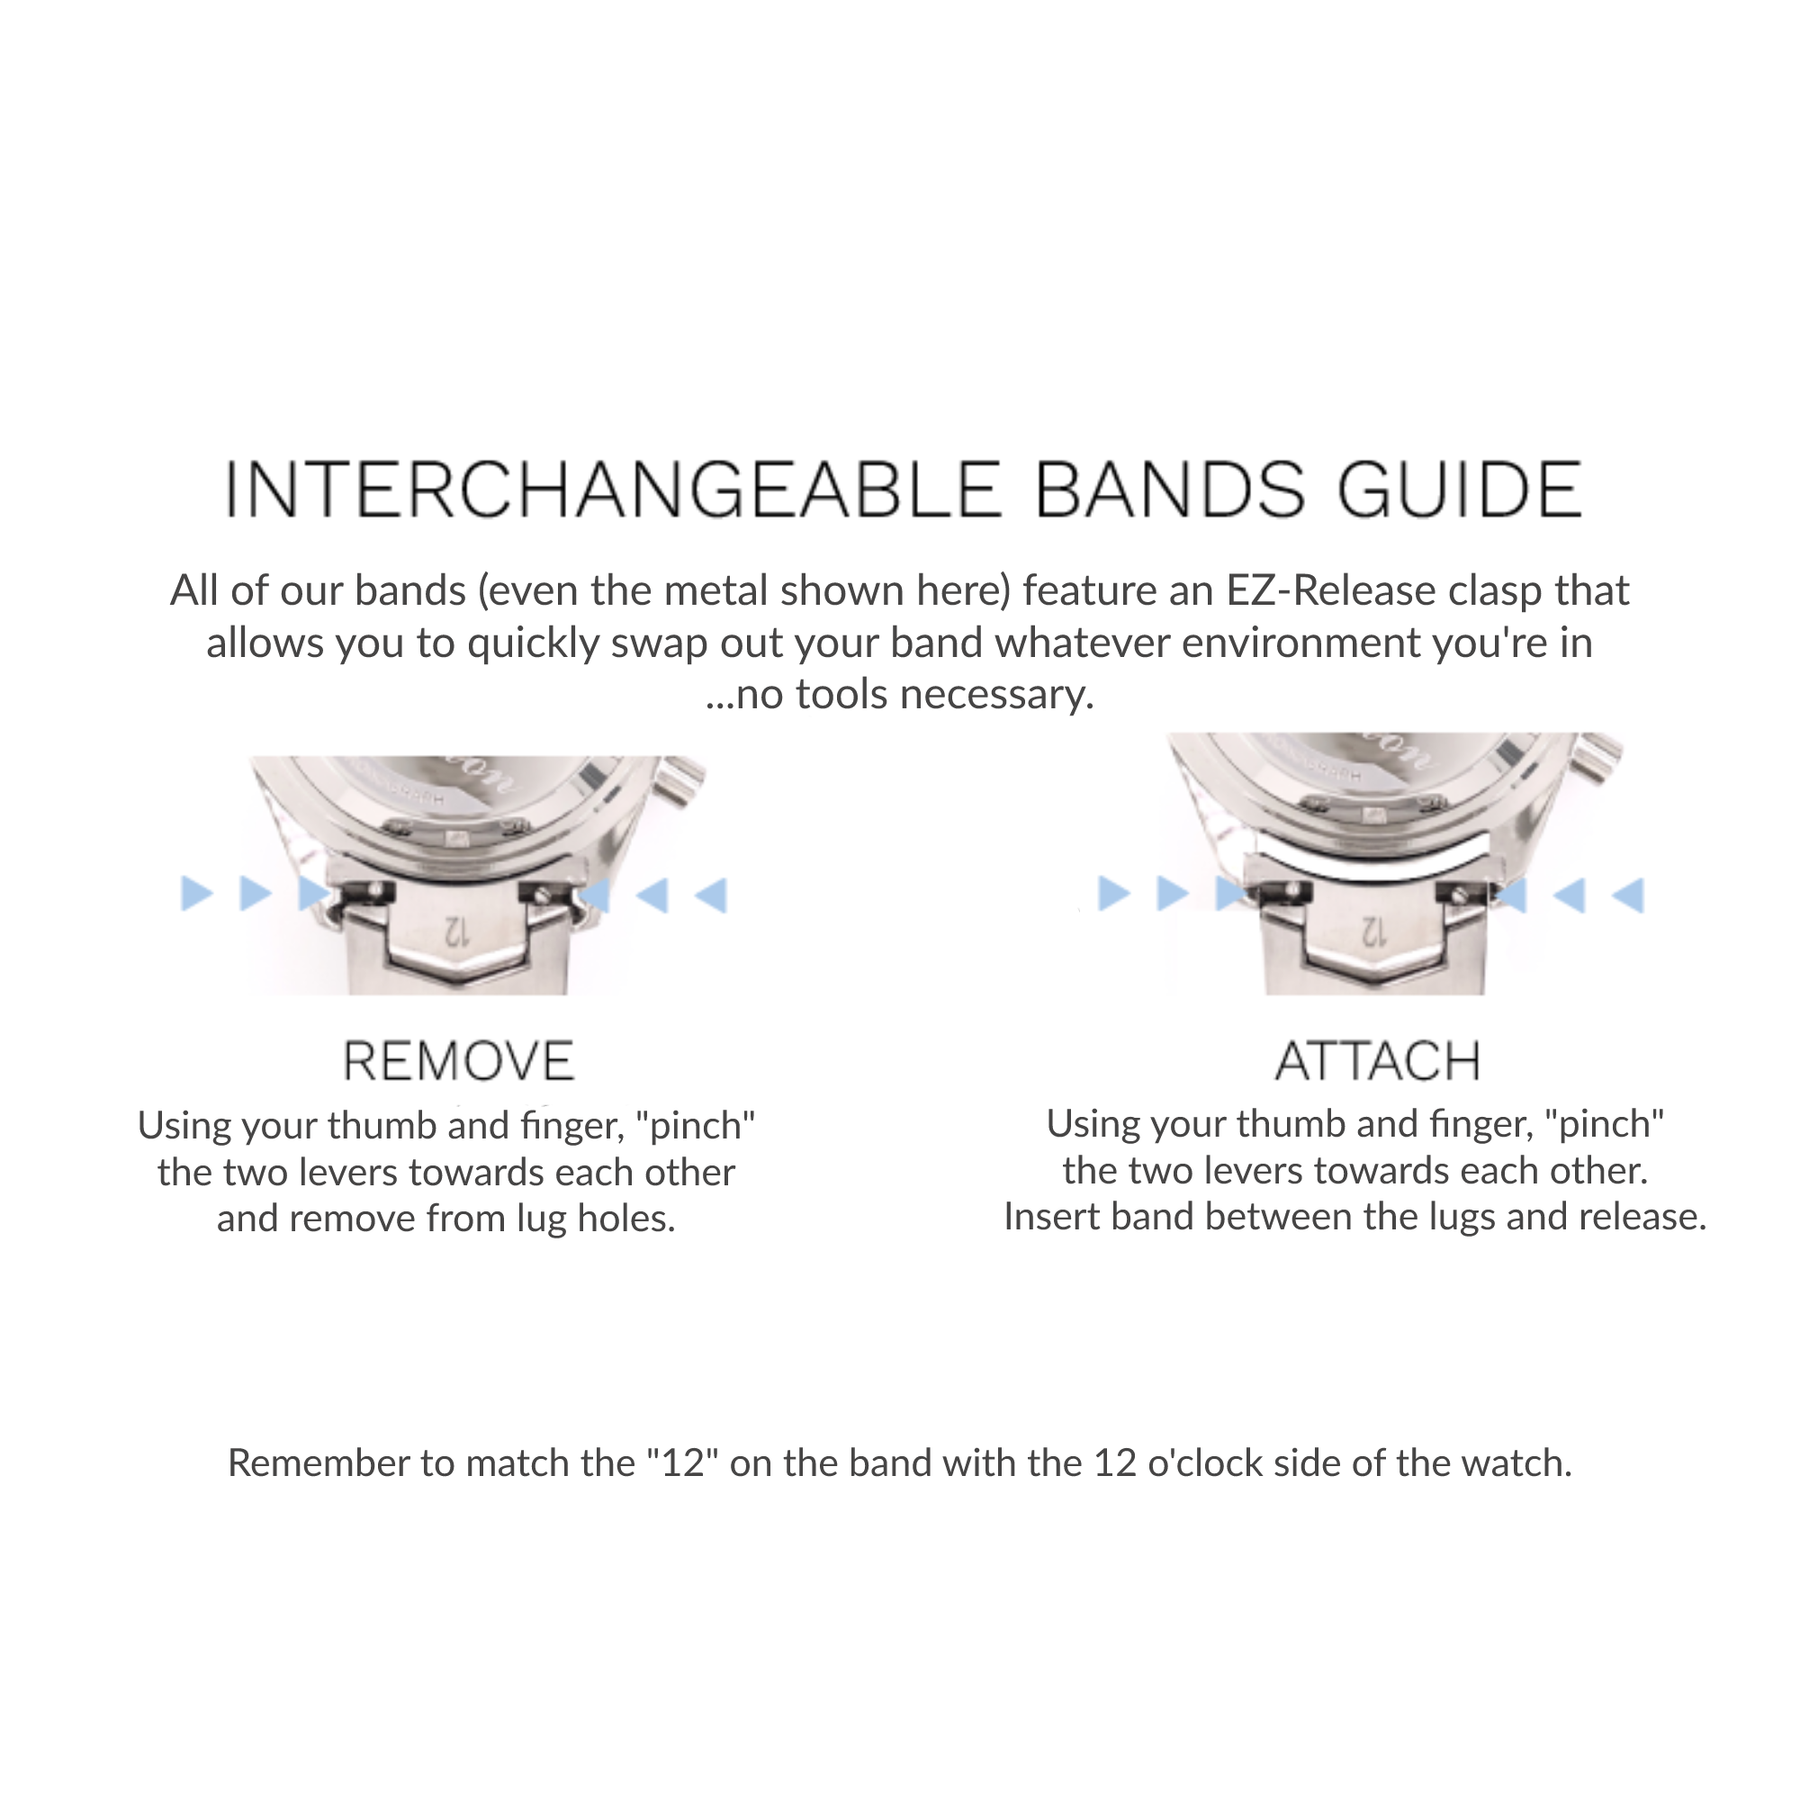 Interchangeable Bands Guide Image showing how to quick release straps